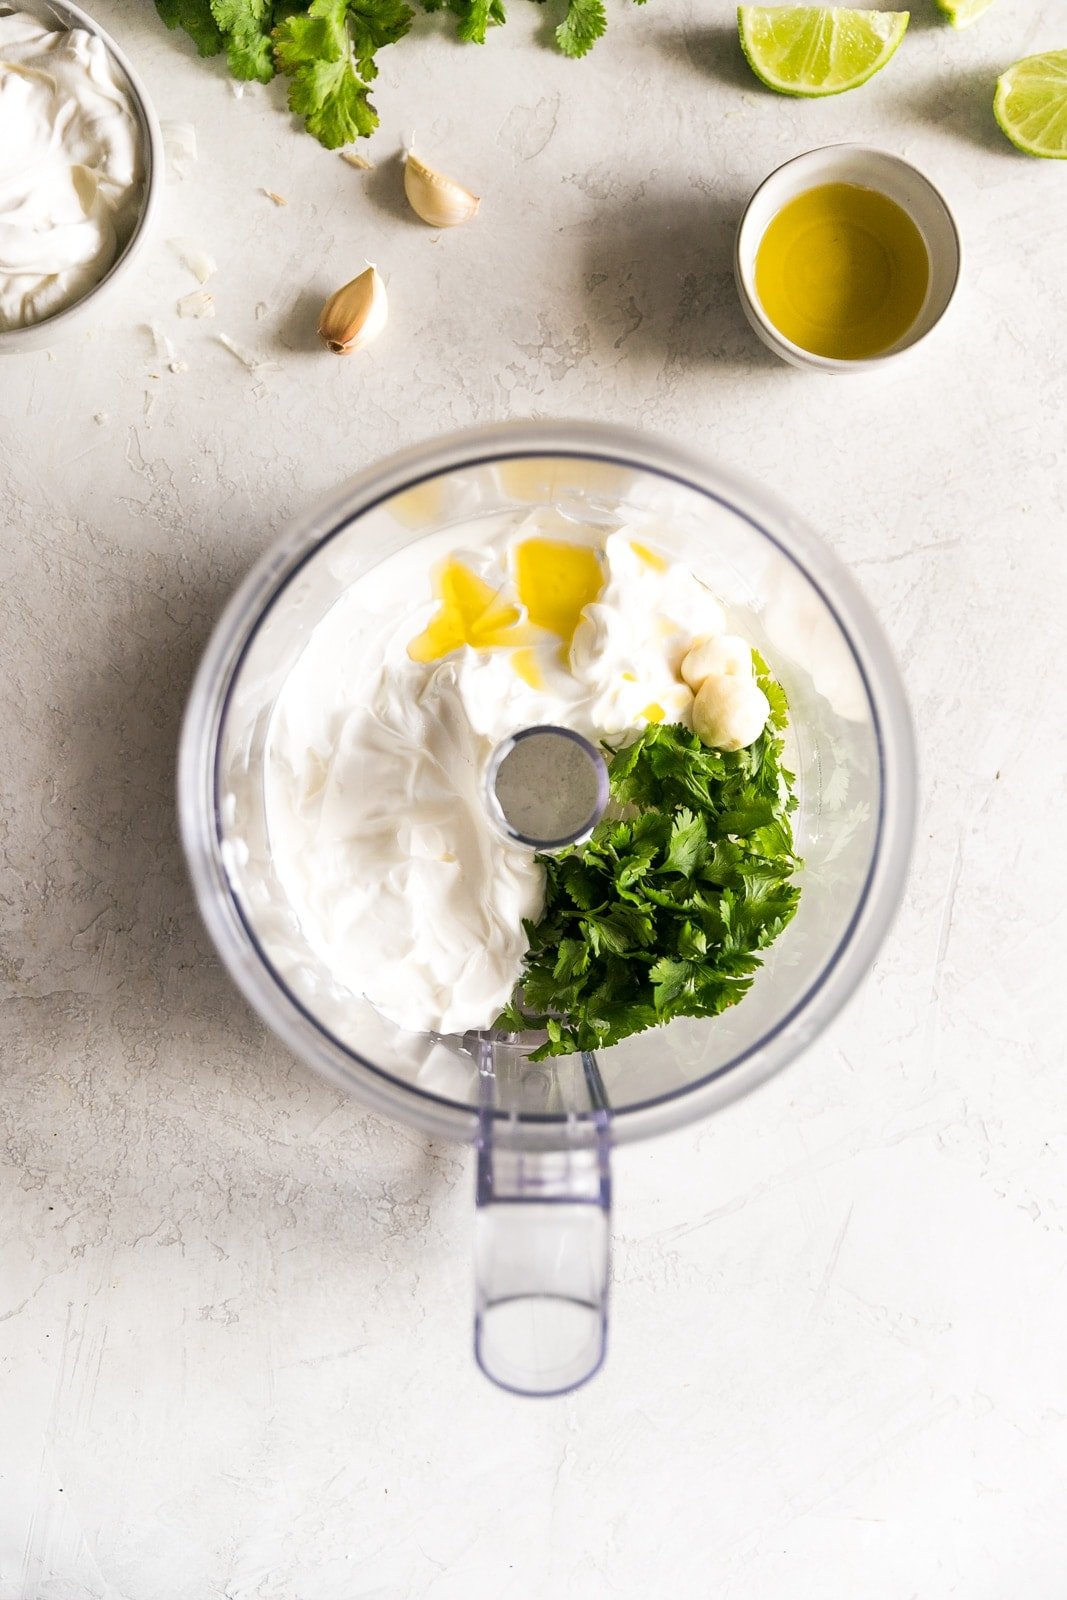 Sour cream, cilantro, garlic, and other ingredients in the food processor